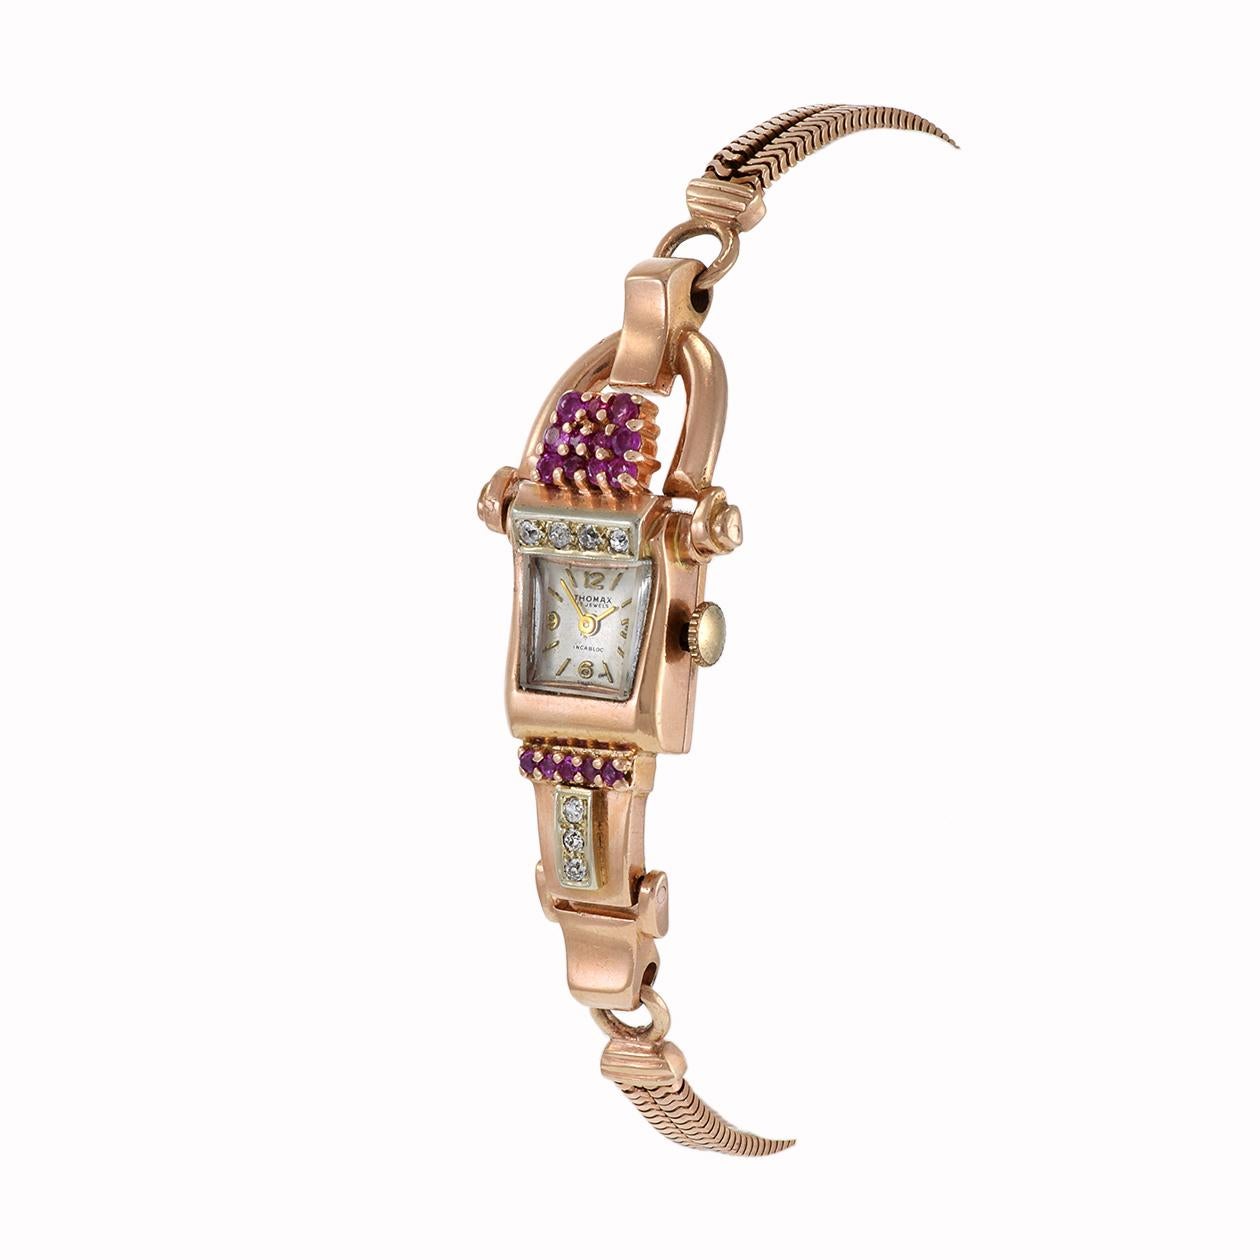 Retro Thomax 1950's Ladies 14KT Pink Gold Ruby and Diamond Cocktail Watch For Sale